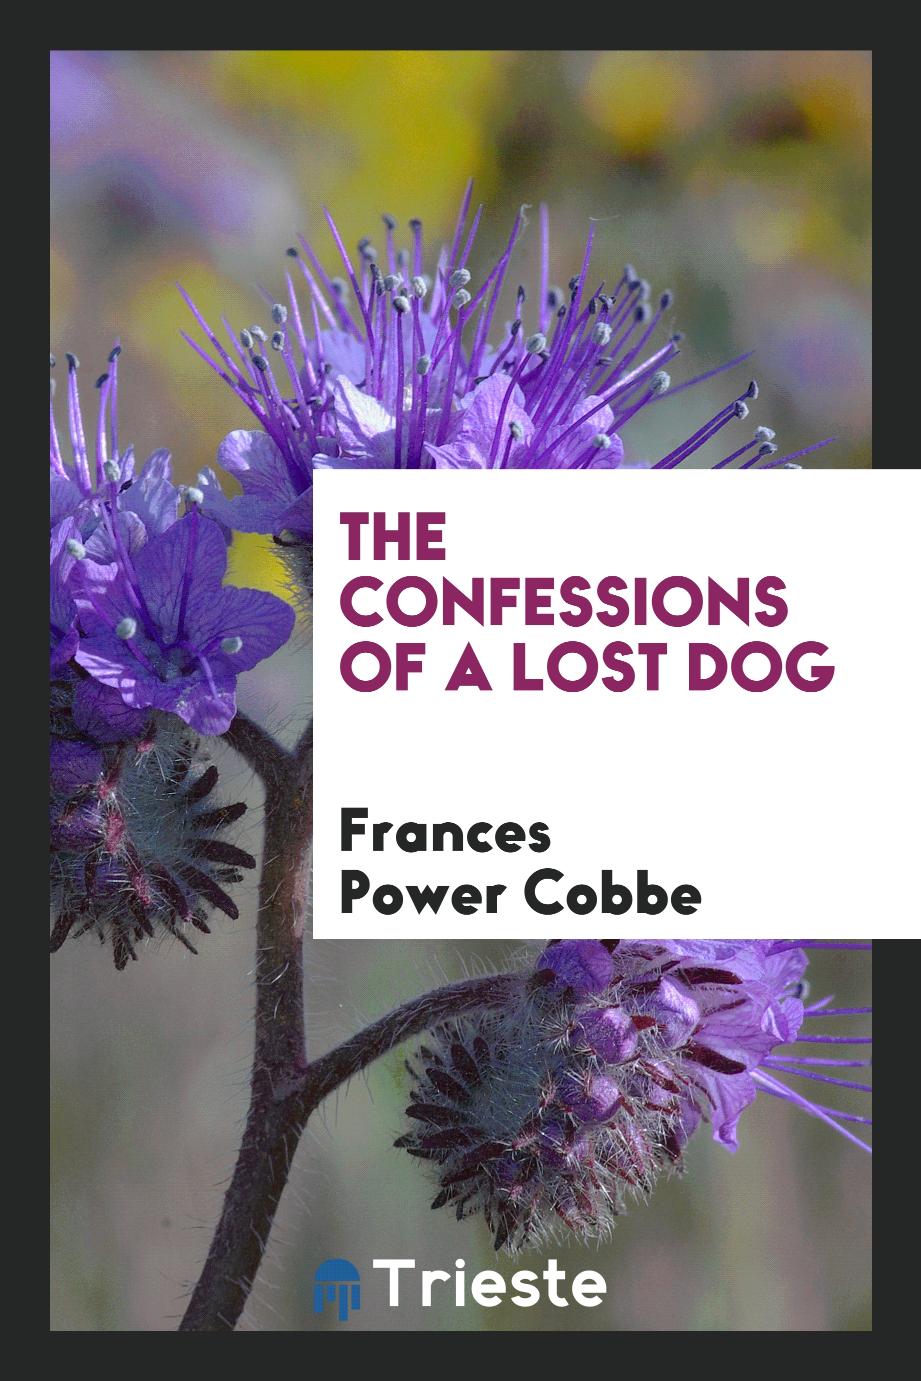 The confessions of a lost dog